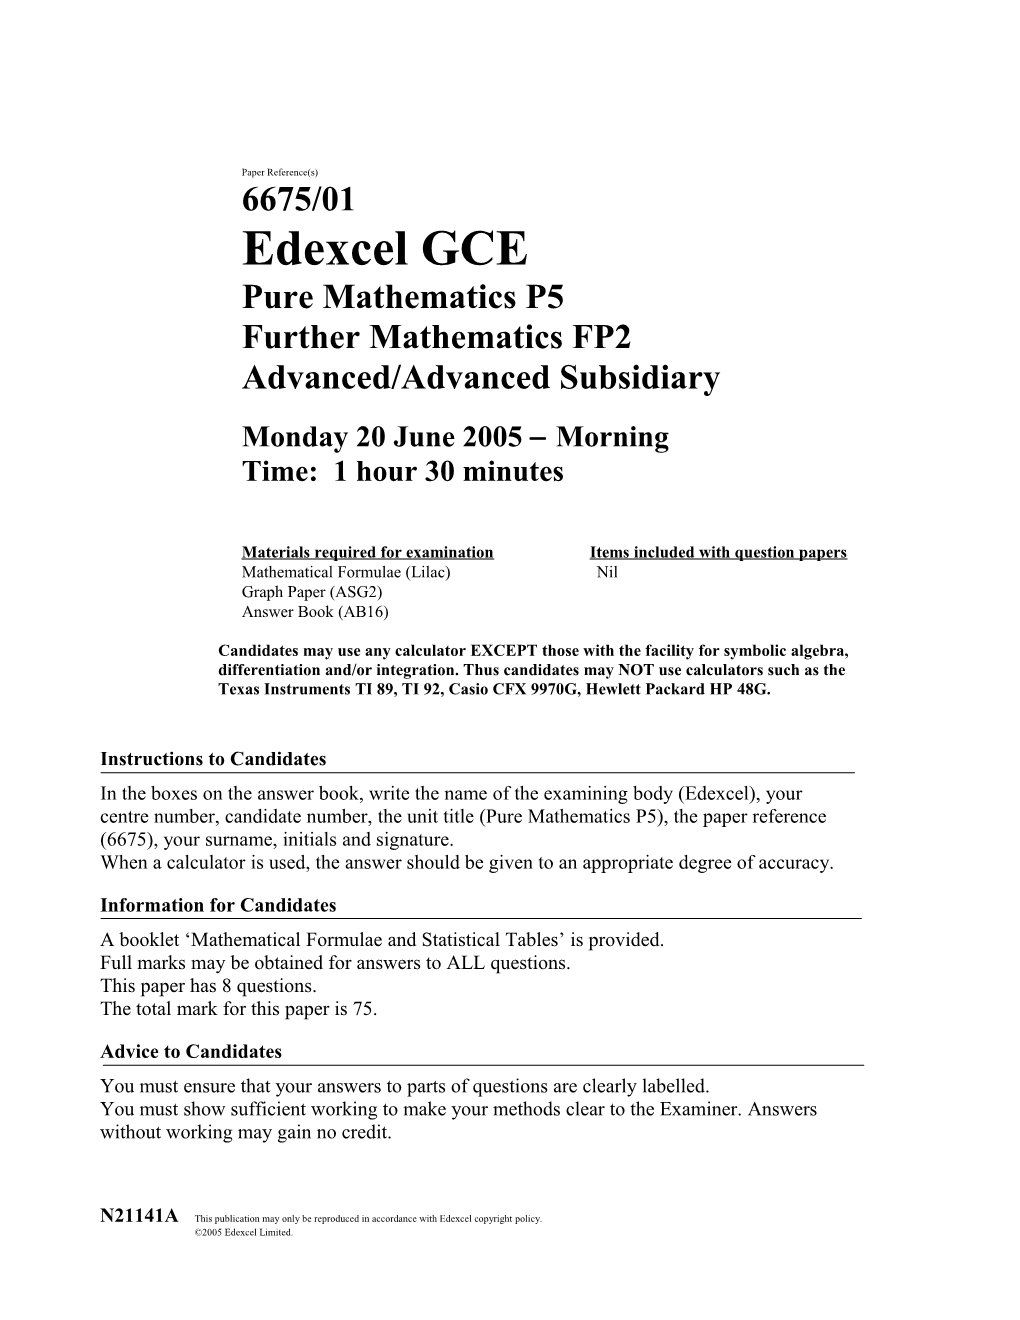 Past Paper - 6675 Pure P5 and Further Pure FP2 June 2005